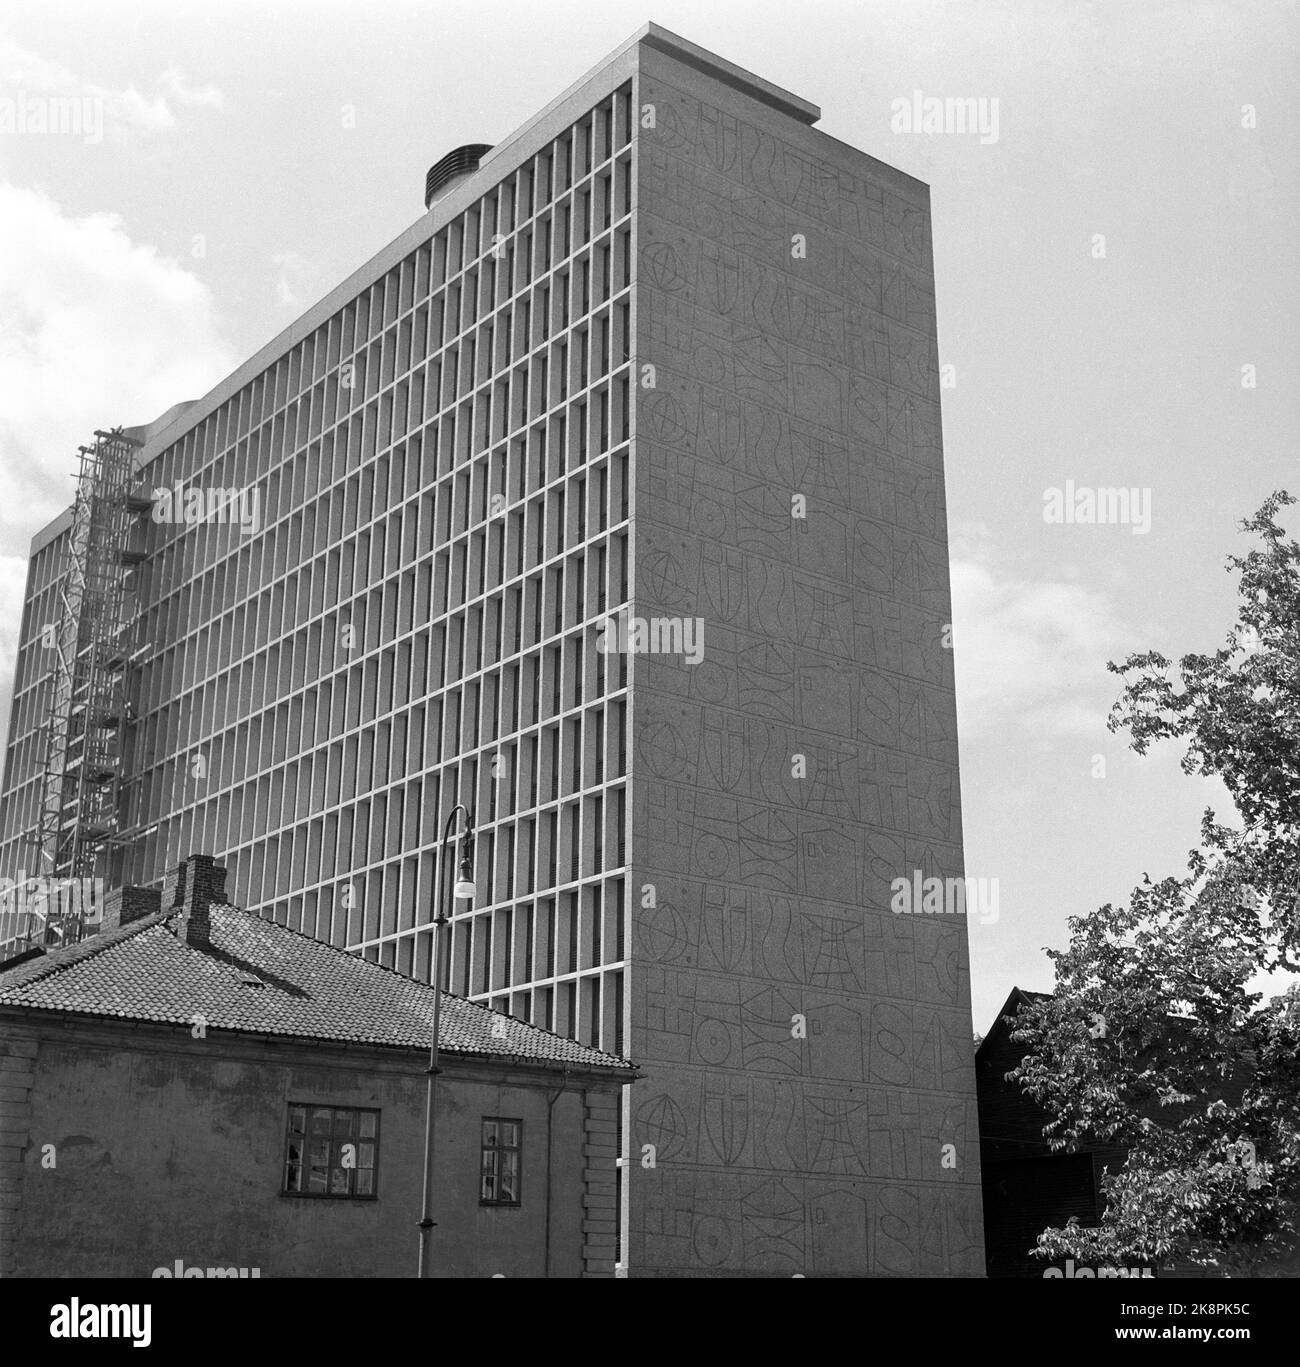 Oslo 19580724. The new government building under construction, July 24, 1958. Old buildings in the area have not yet been demolished. 17352b Photo: Jan Nordby/NTB Stock Photo